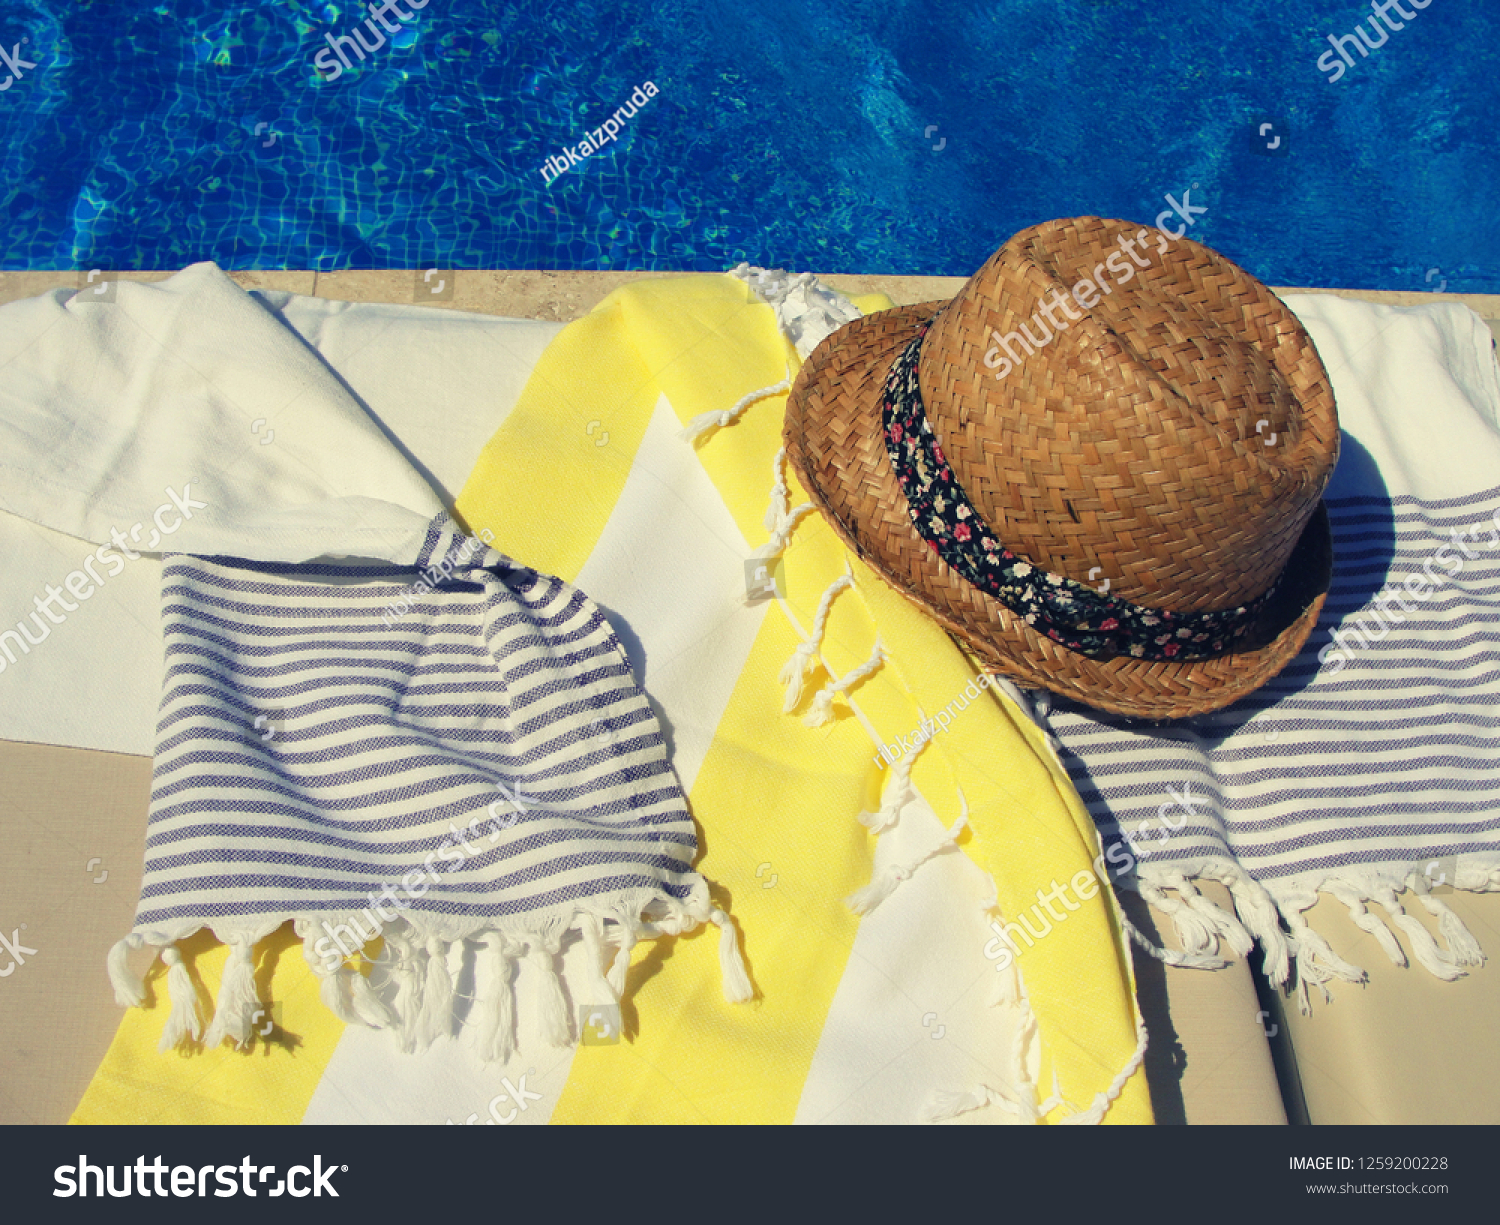 Straw summer hat with ribbon and cotton towels on a sunbed near the swimming pool. Bright sunny summer vacation day, filtered image, contrast filter effect #1259200228